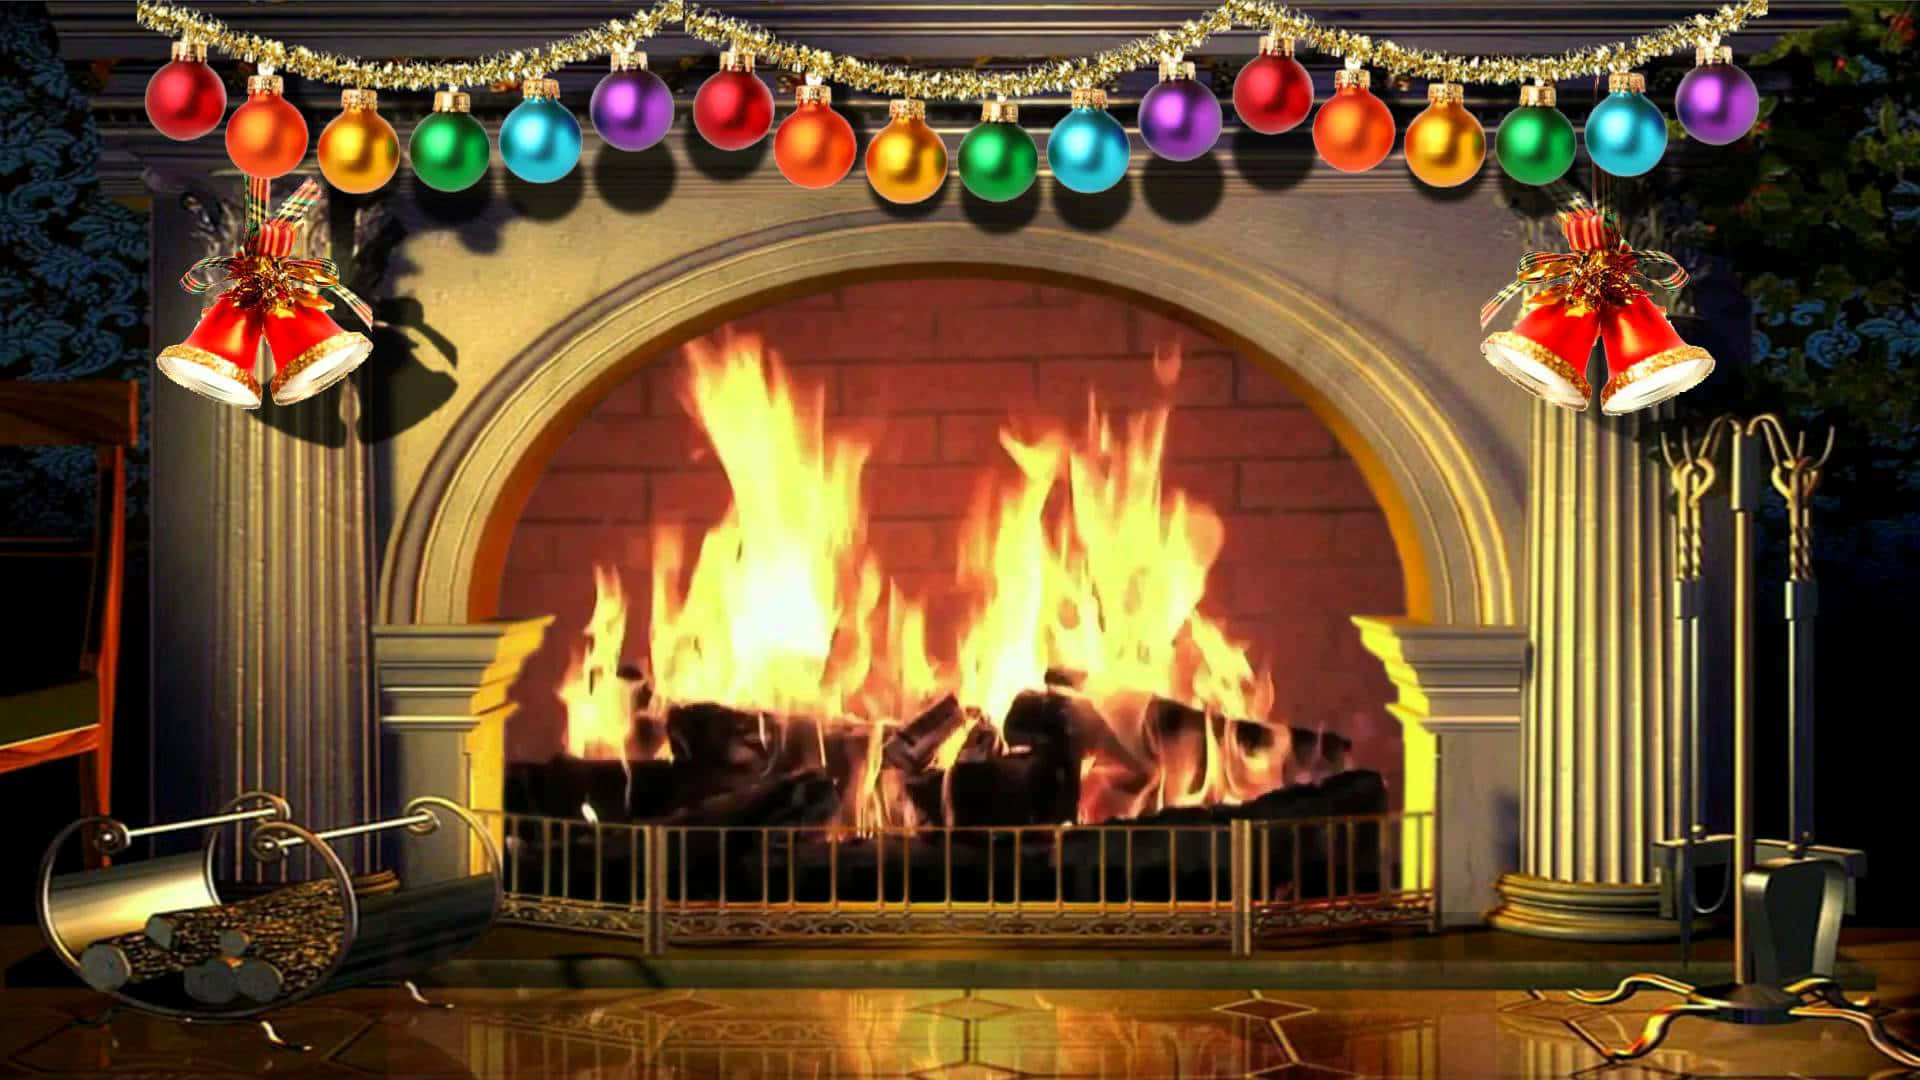 Download Christmas Fireplace With Colorful Ornaments Background ...